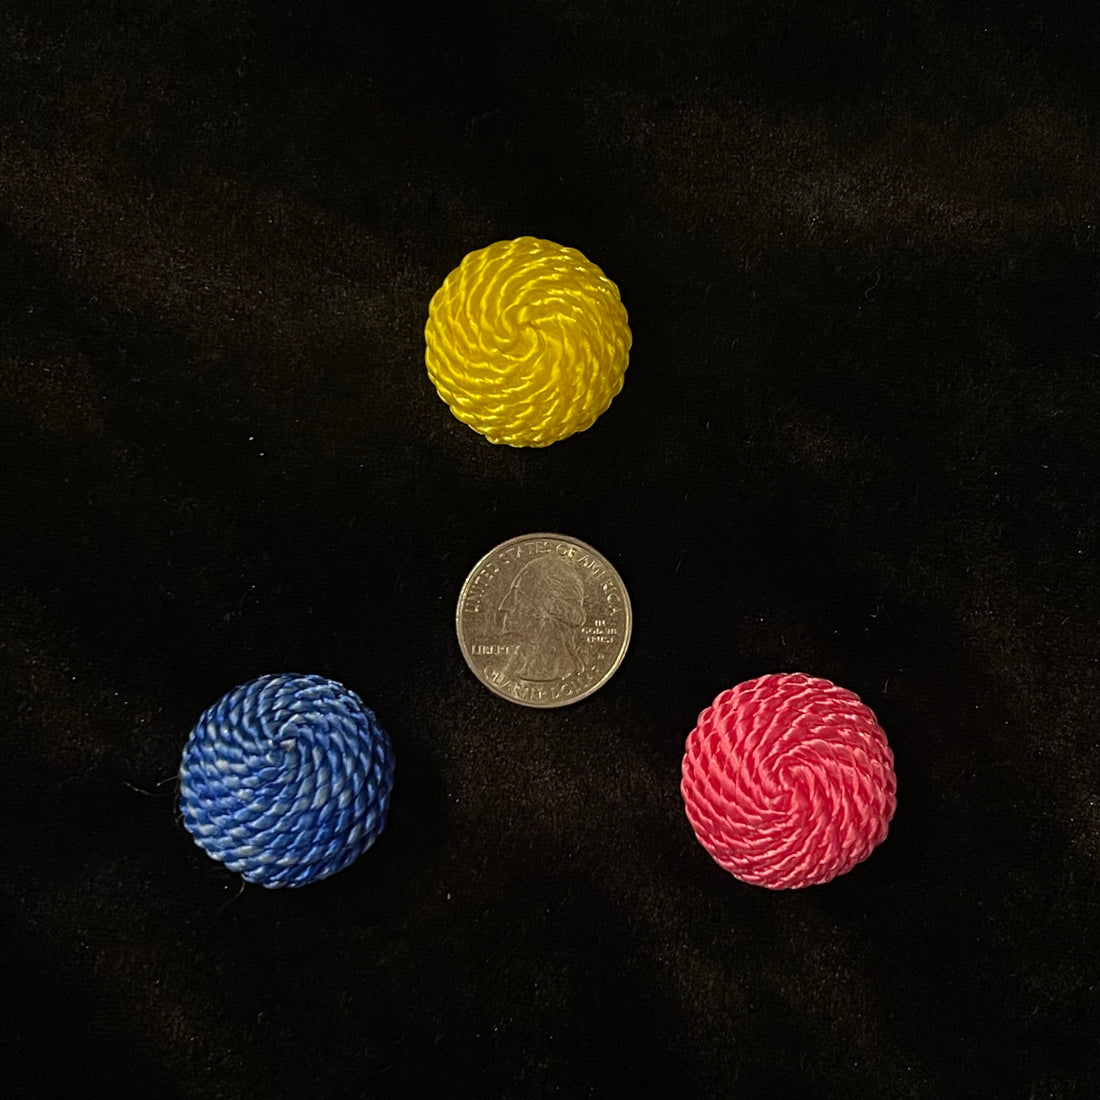 Vintage Yellow, Blue, and Pink Rope Pattern Round Button Covers Set of 3